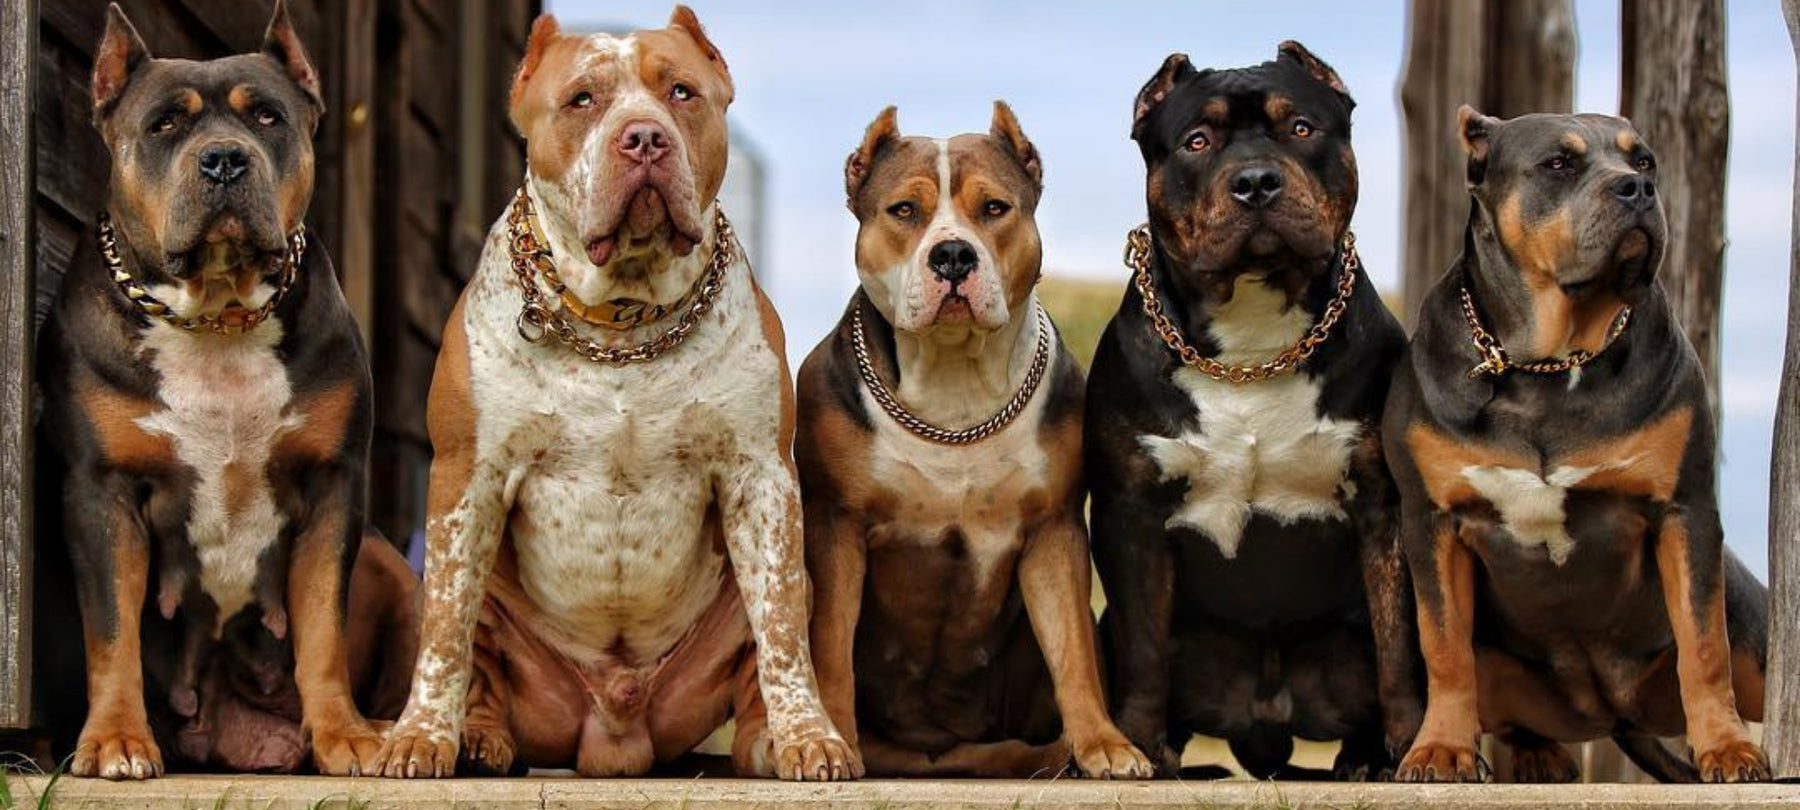 Gold_Cuban_Link_Luxury_Dog_Collar_Rottweiler_and_Leash_for_Large_Tough_Dog_Breeds_like_Pit_Bulls_XL_Bully_Doberman_Rotteweiler_and_more_BIG_DOG_CHAINS 77